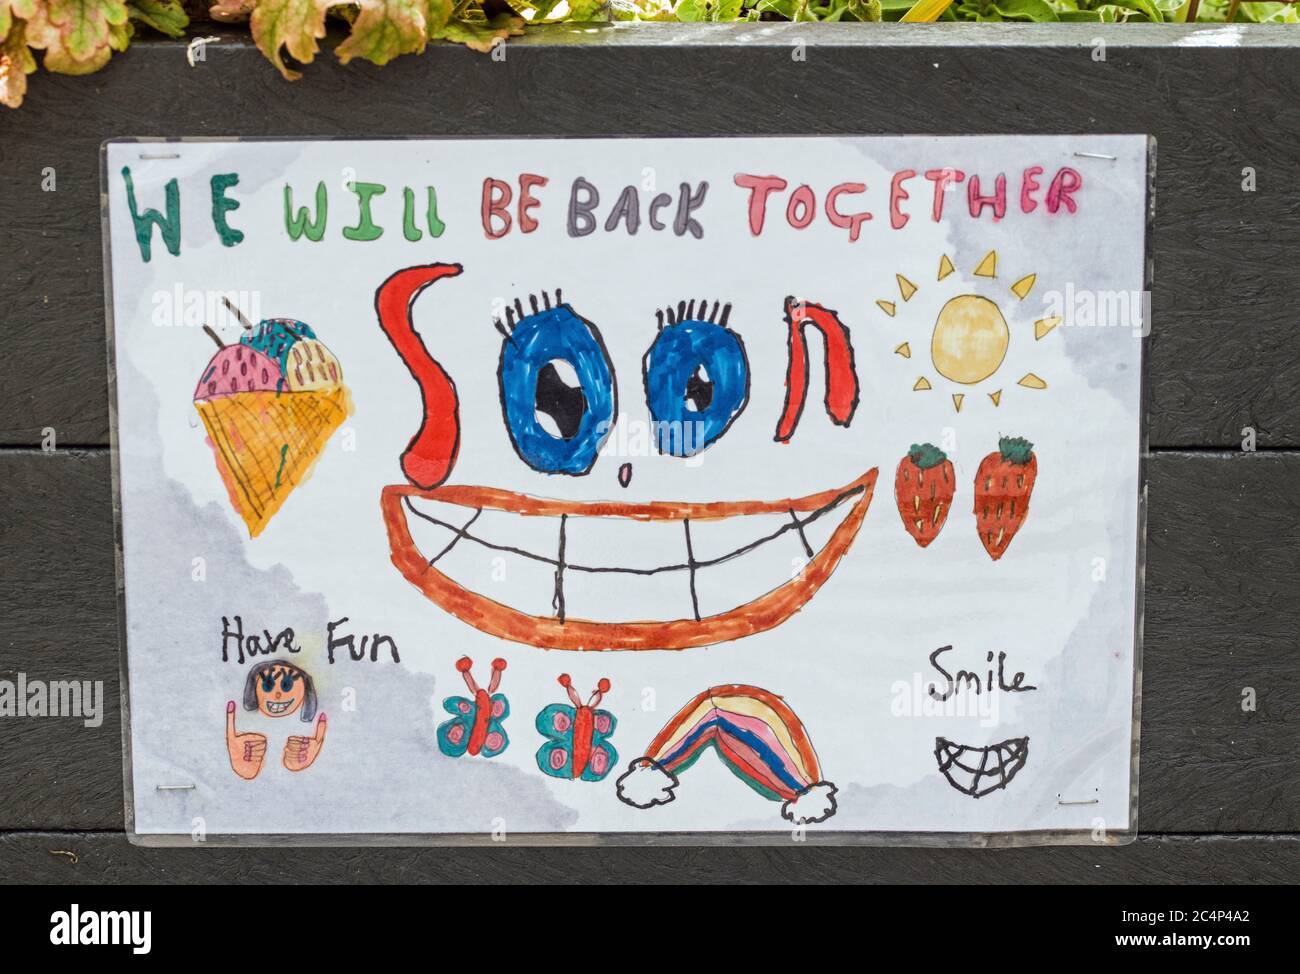 A poster put up by a small child in my village near Cardiff during the Coronavirus lockdown in early 2020. 'We will be back together soon'. Stock Photo